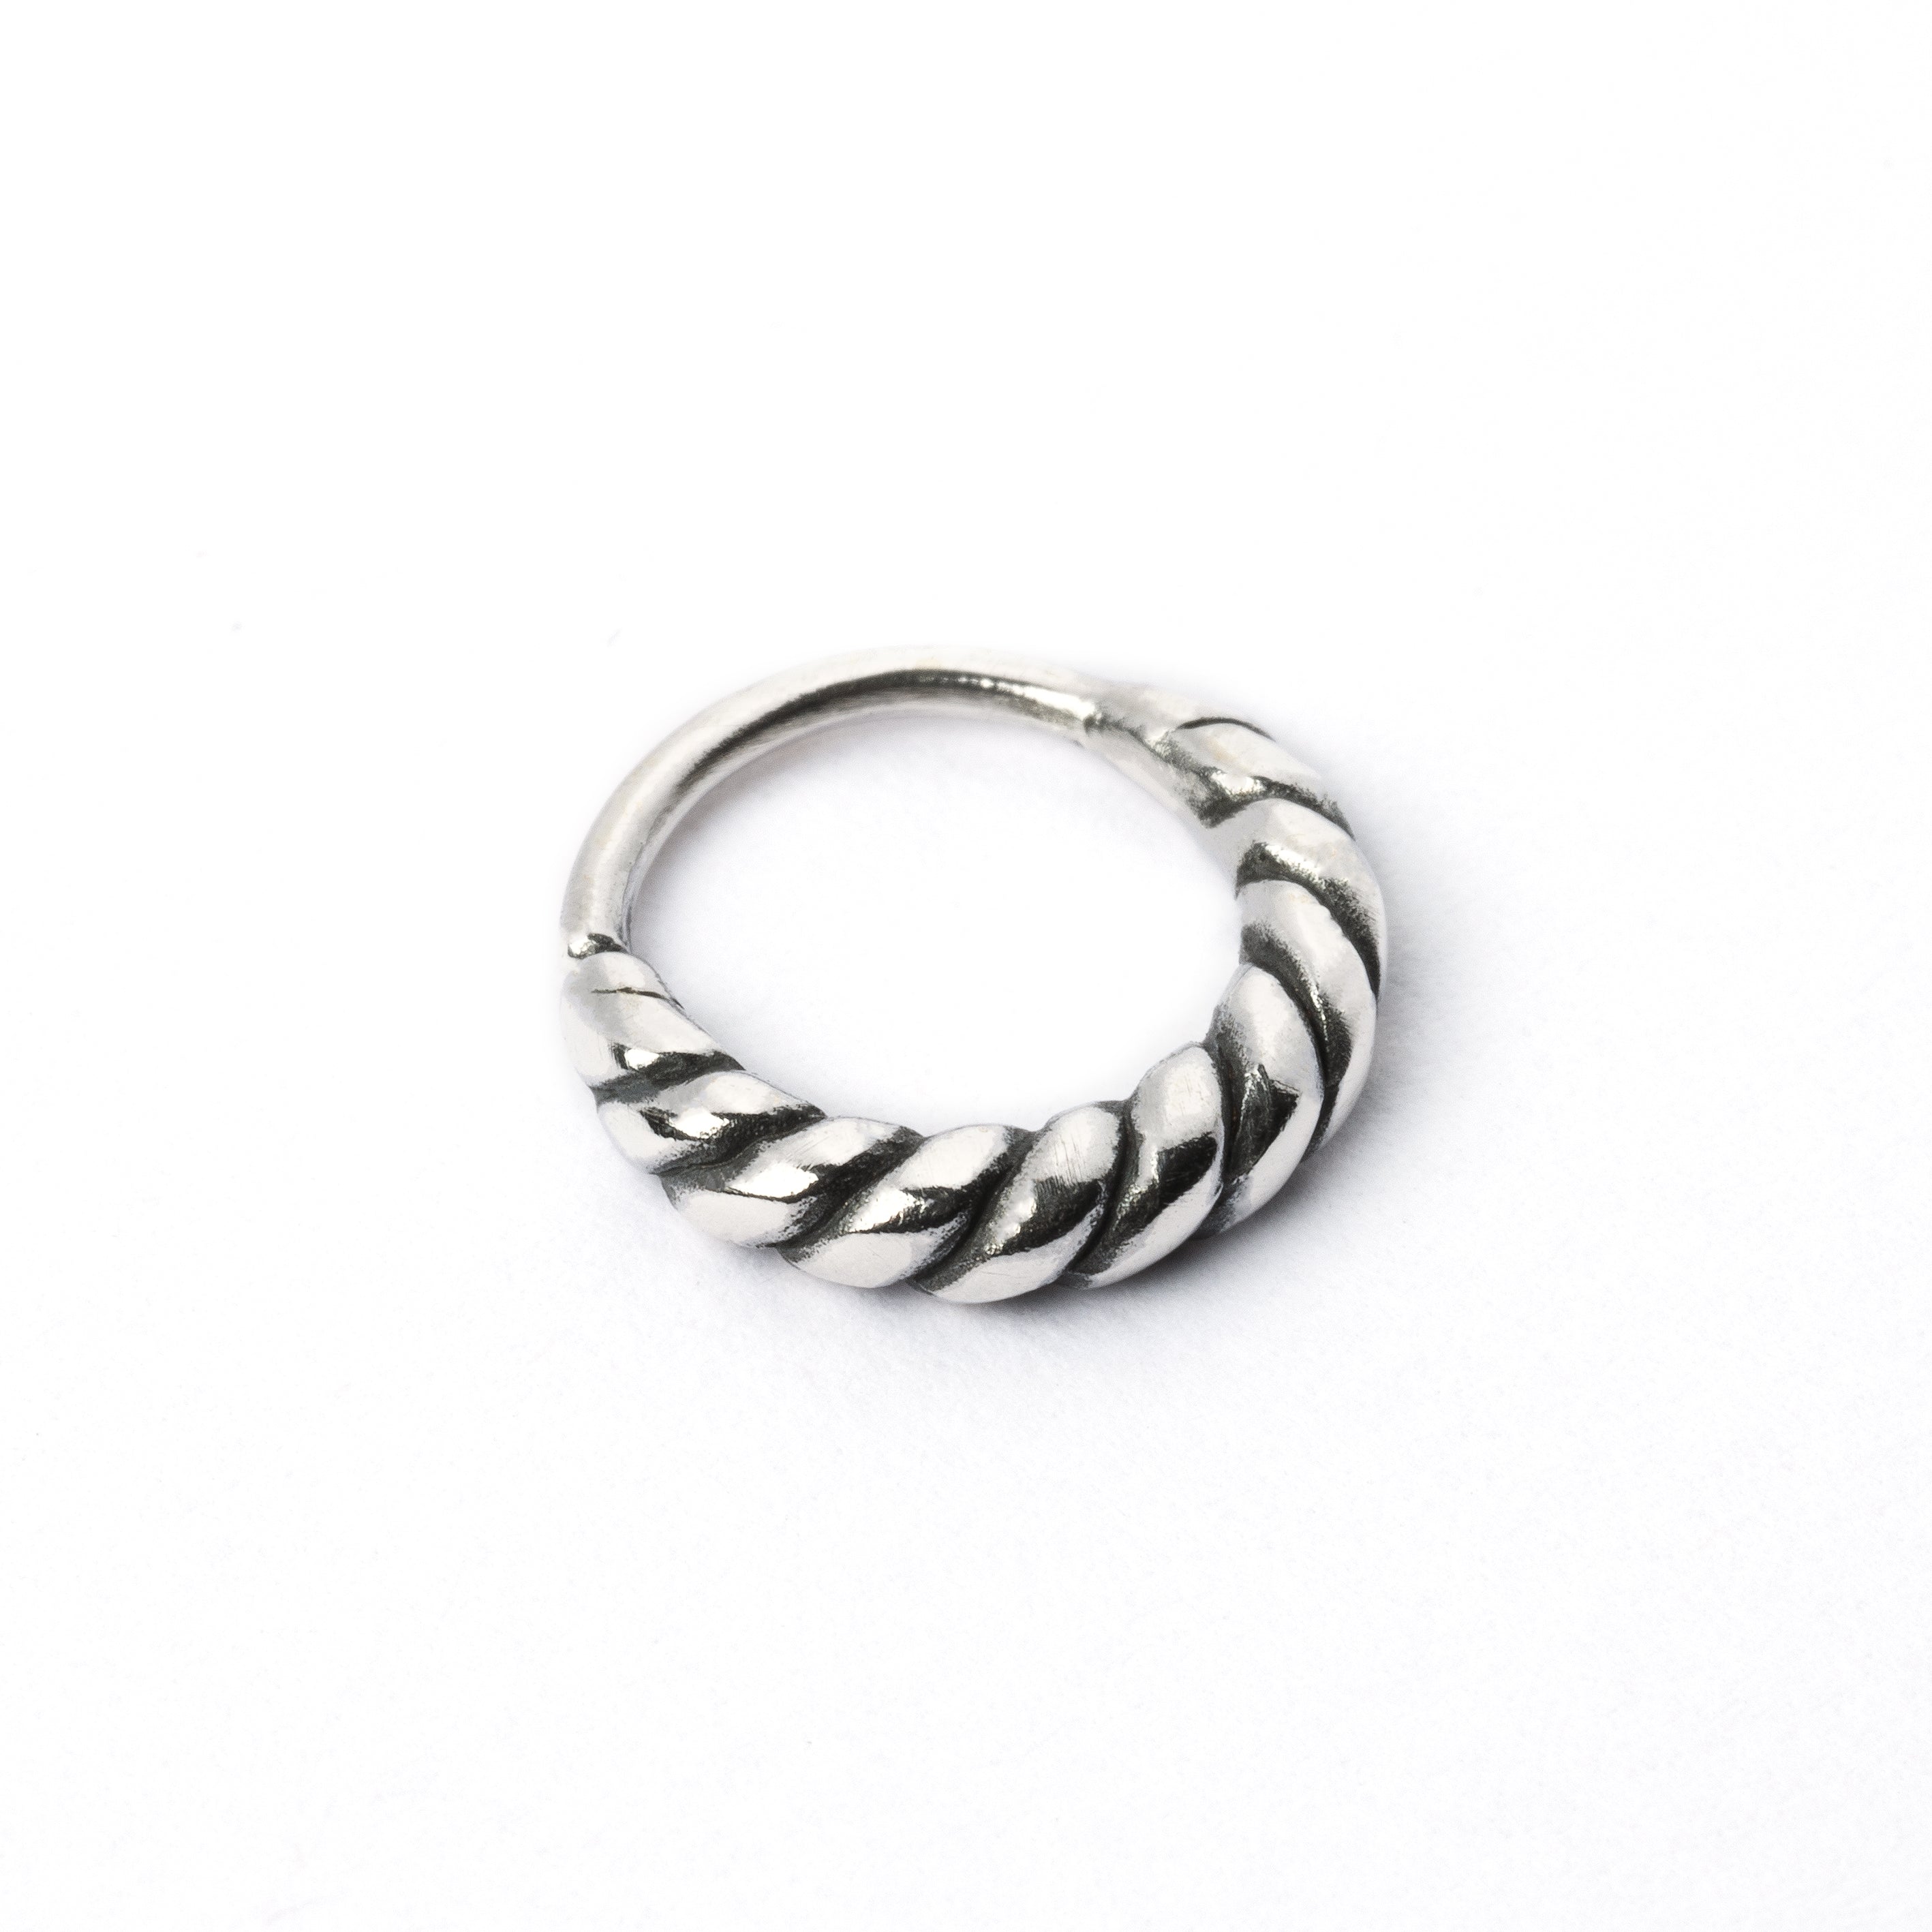 Twisted Silver septum piercing ring left side view